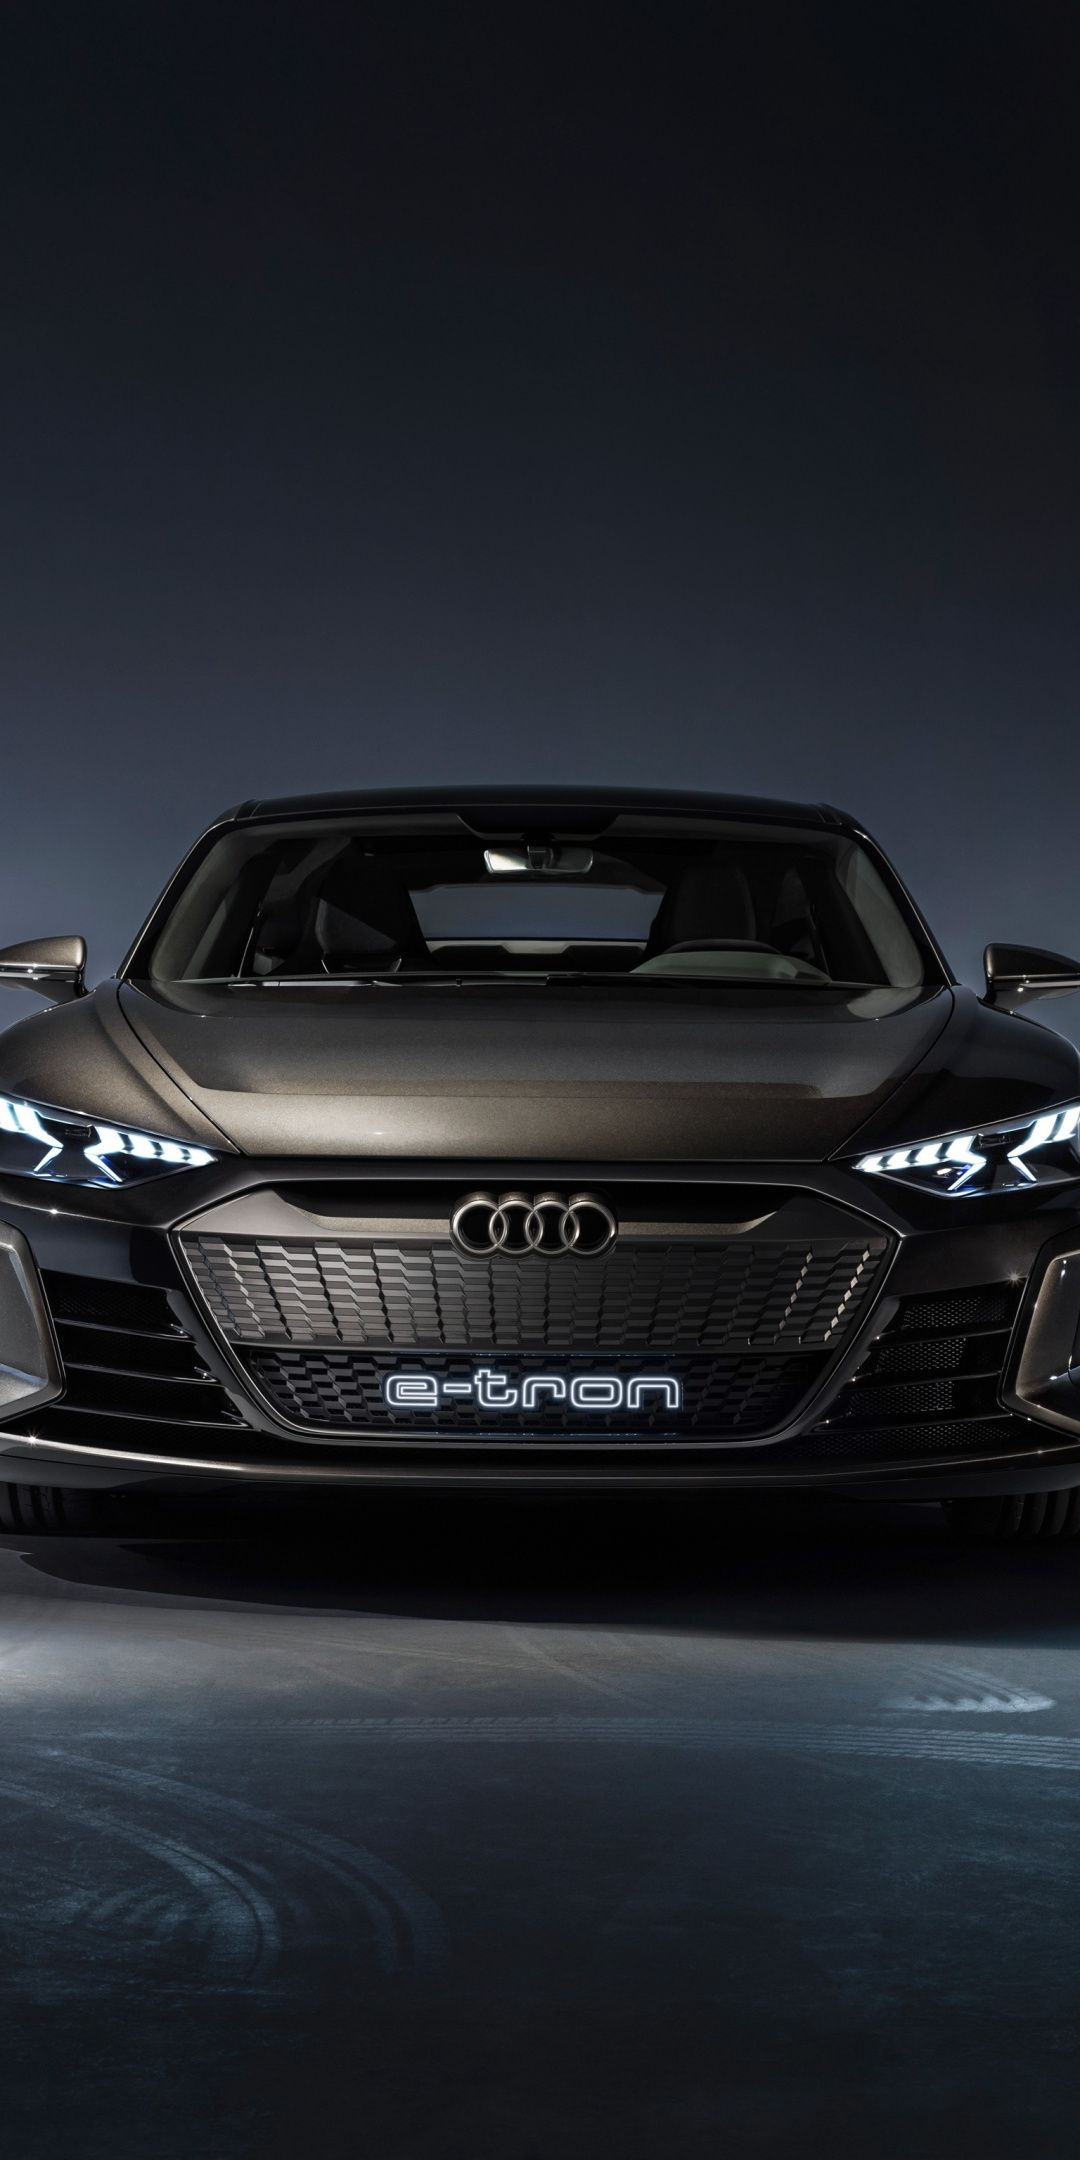 Download wallpaper 1440x2560 audi, rs7, side view qhd samsung galaxy s6,  s7, edge, note, lg g4 hd background